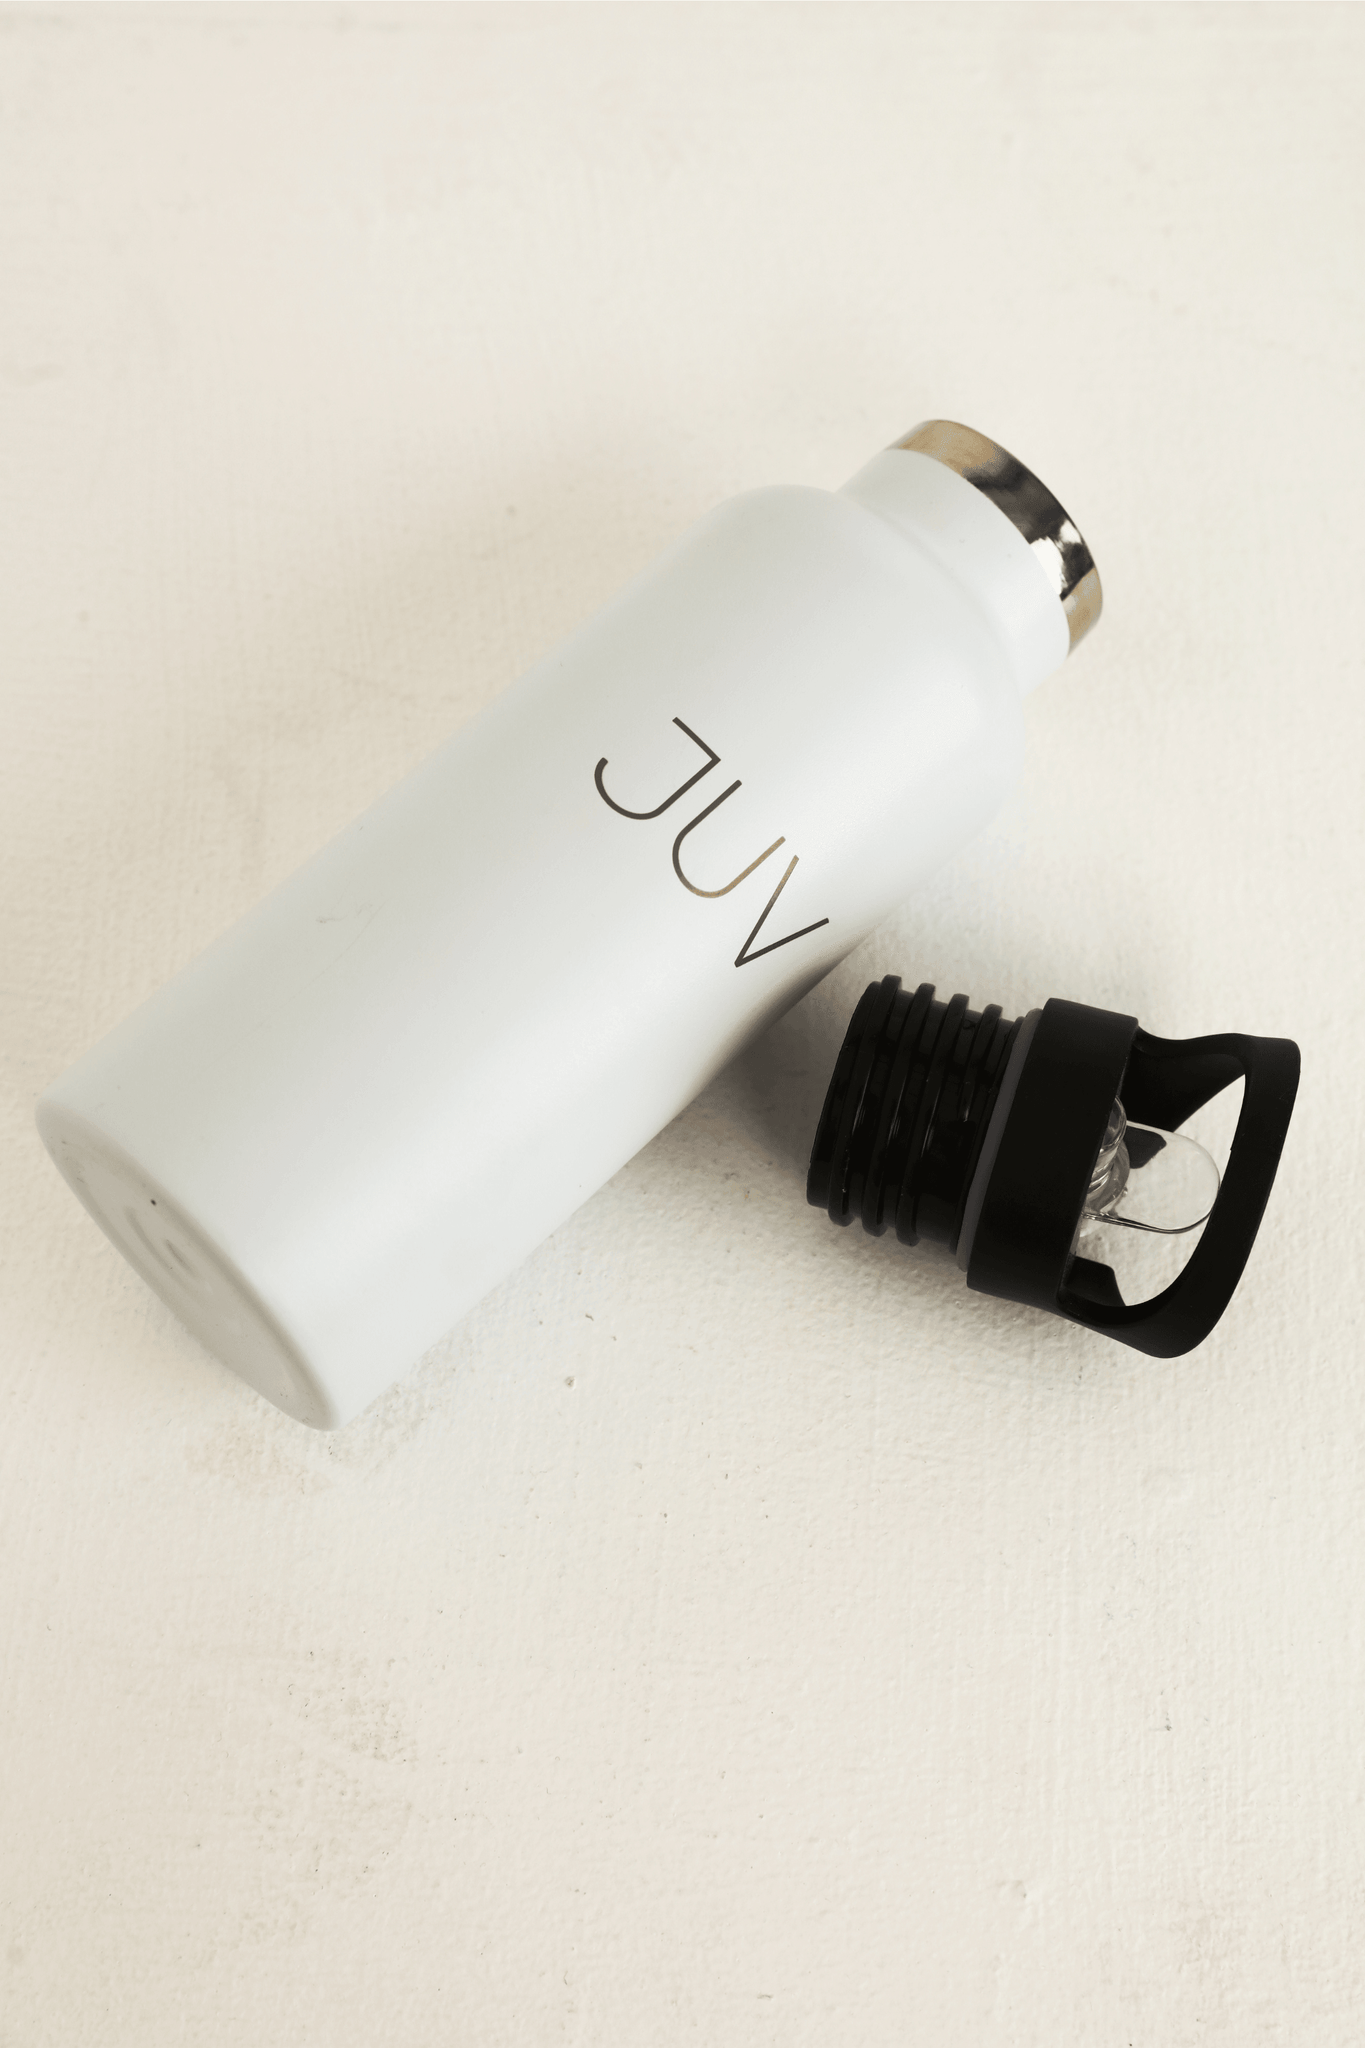 Pure thermal bottle with sipper - JUV Activewear